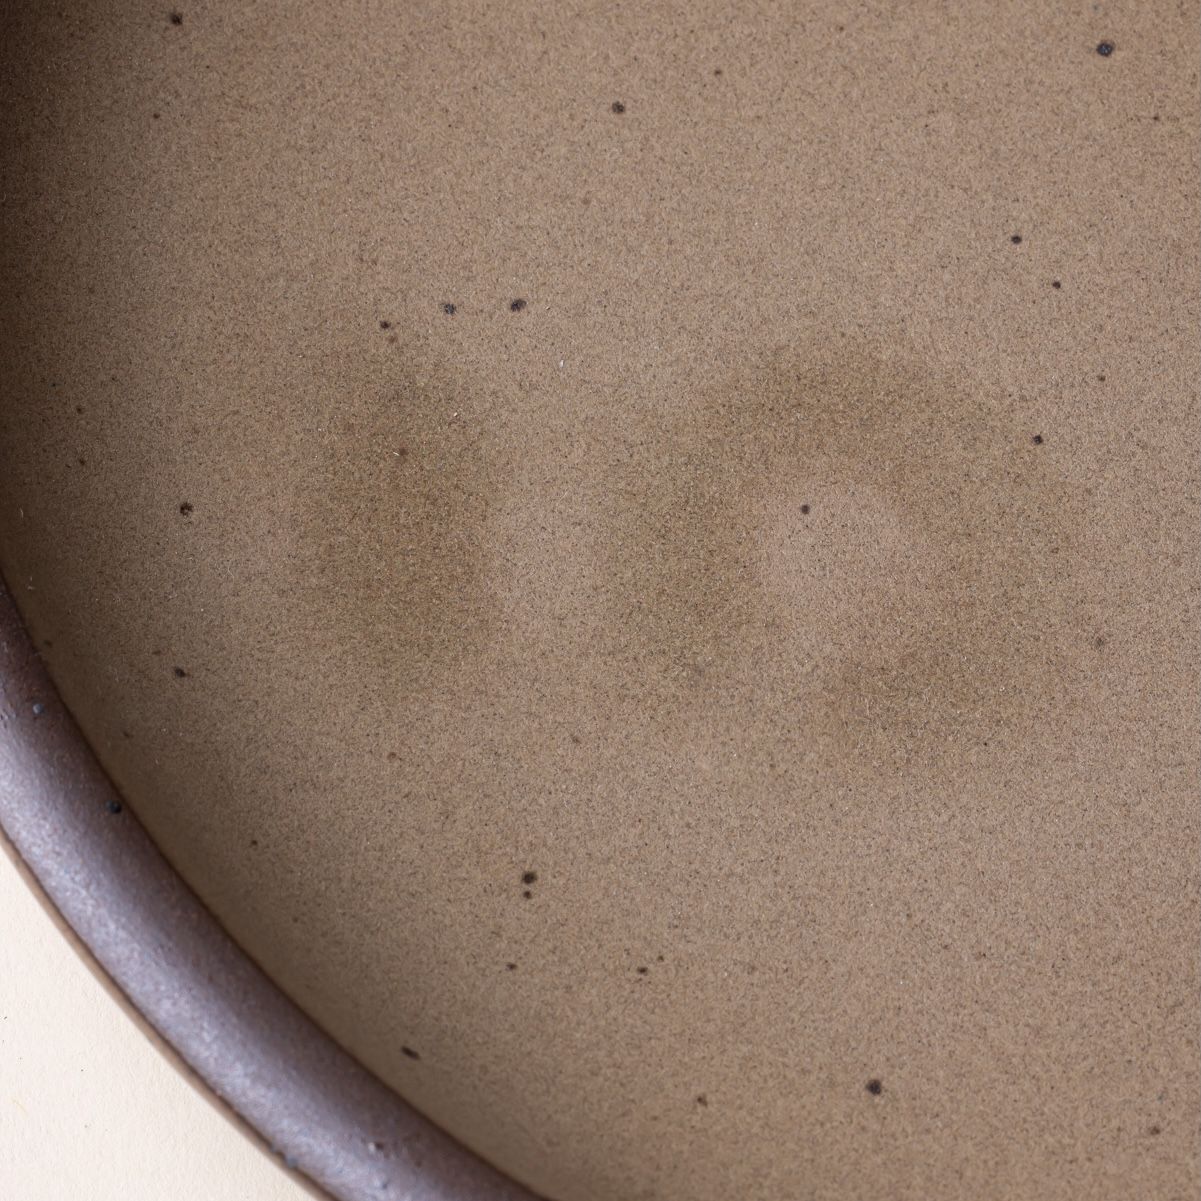 A closeup of a ceramic plate with water marks inside the glaze.